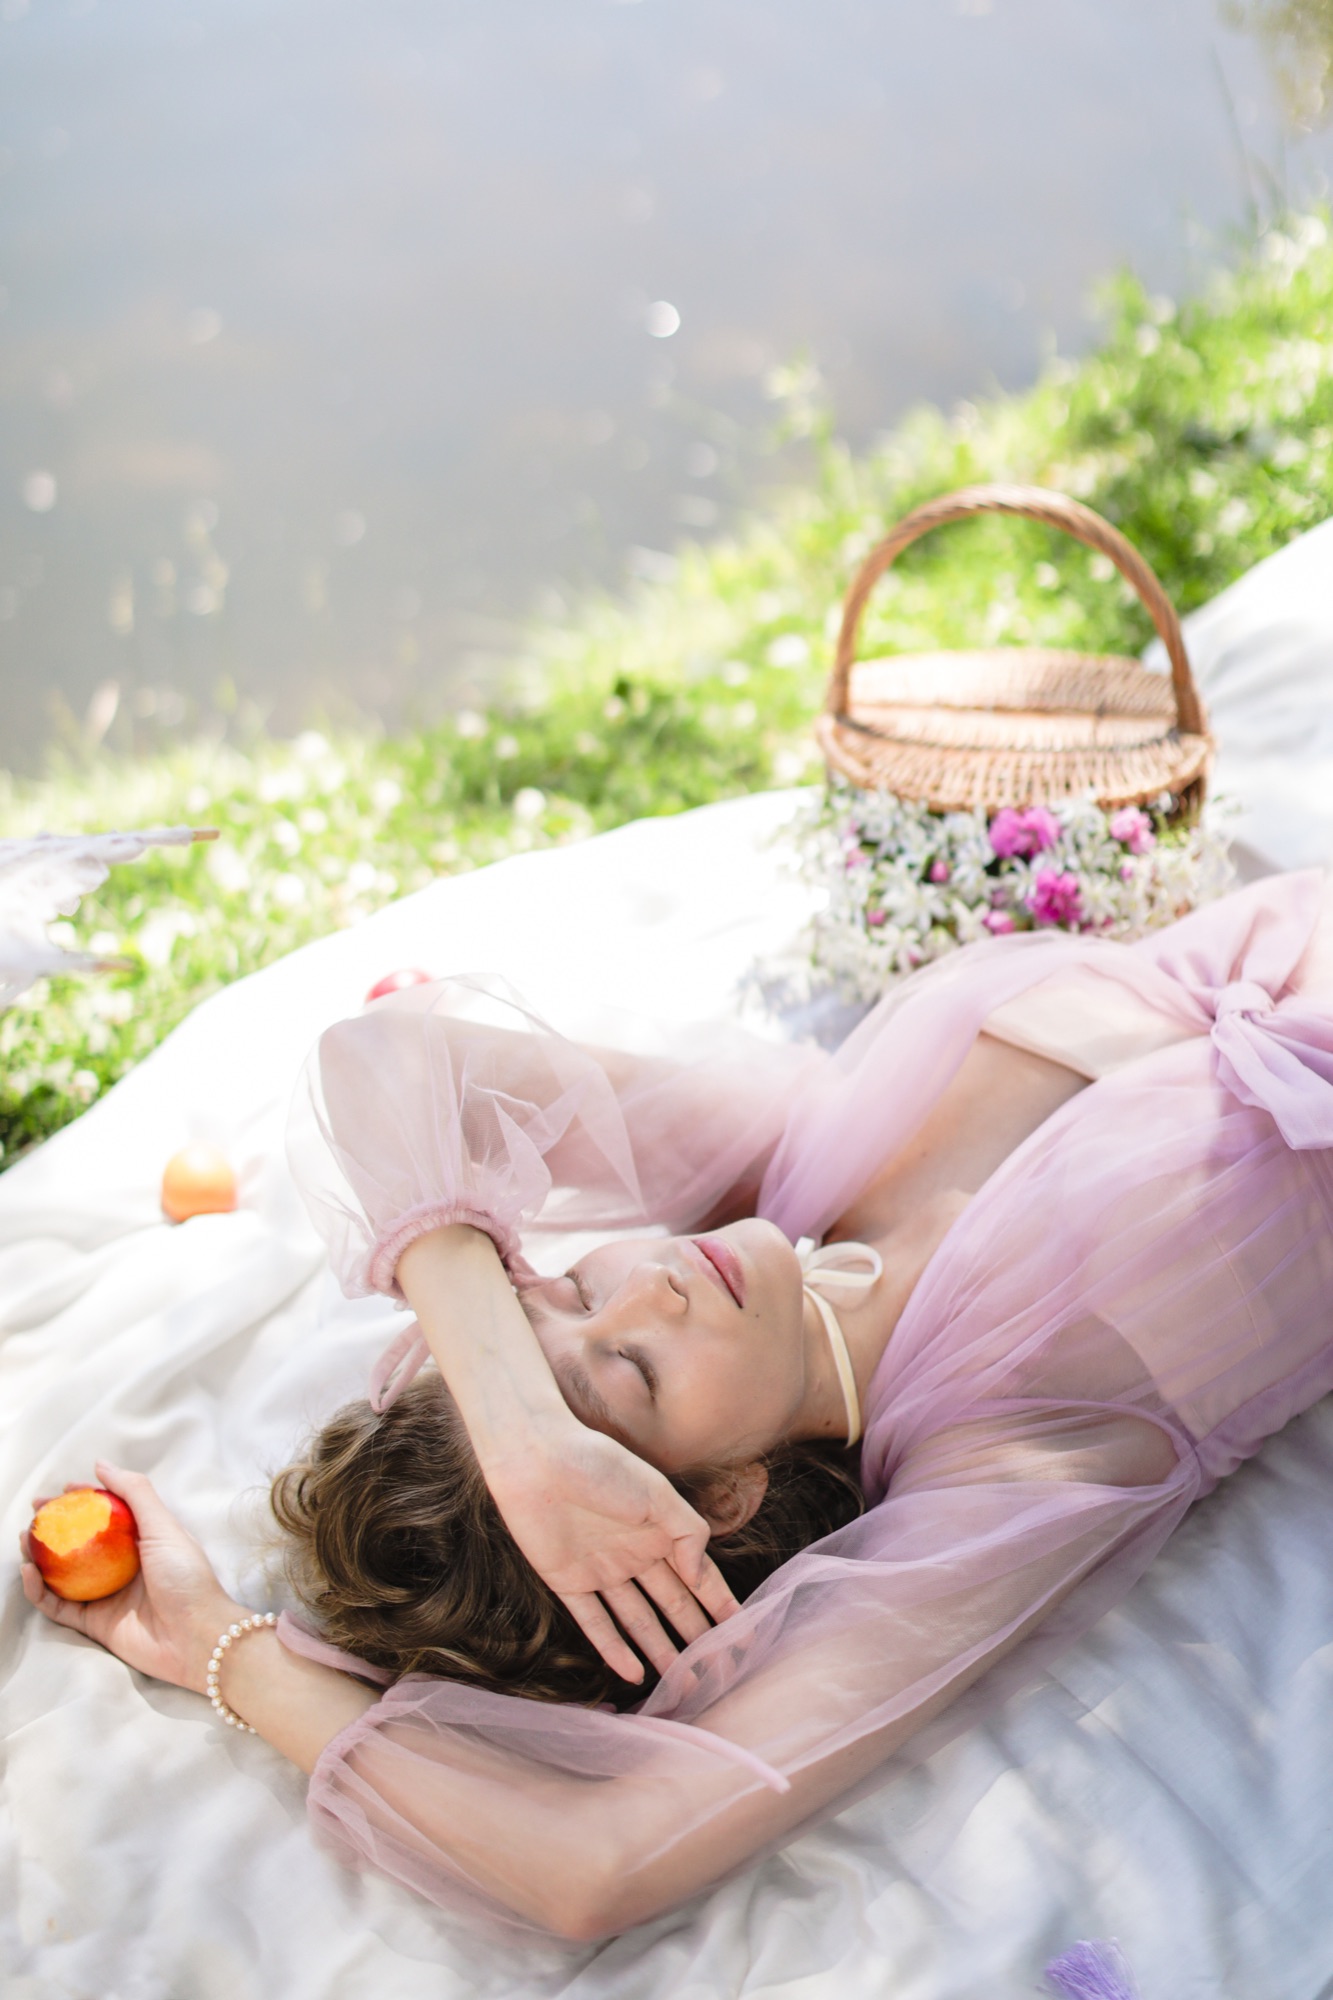 A young female wearing a pink and white dress. She is lying down carefree, on a pick-nick setting, holding in her hand a half-eaten peach. Her eyes are closed while enjoying the sunny weather, next to her is a beautiful pick-nick basket decorated with pink and white flowers.